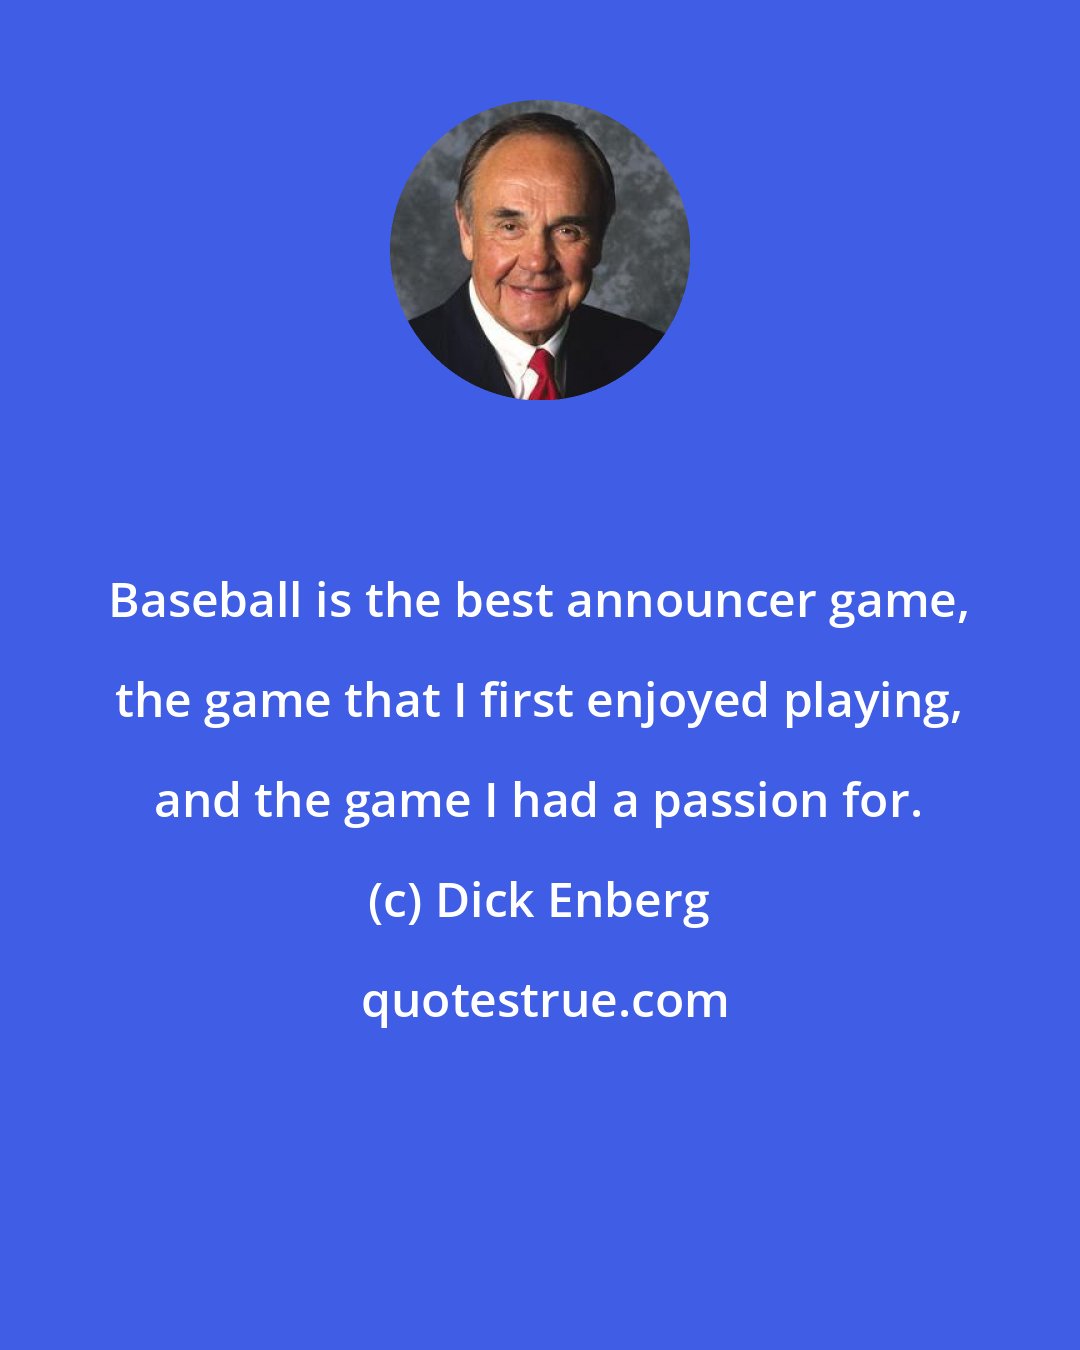 Dick Enberg: Baseball is the best announcer game, the game that I first enjoyed playing, and the game I had a passion for.